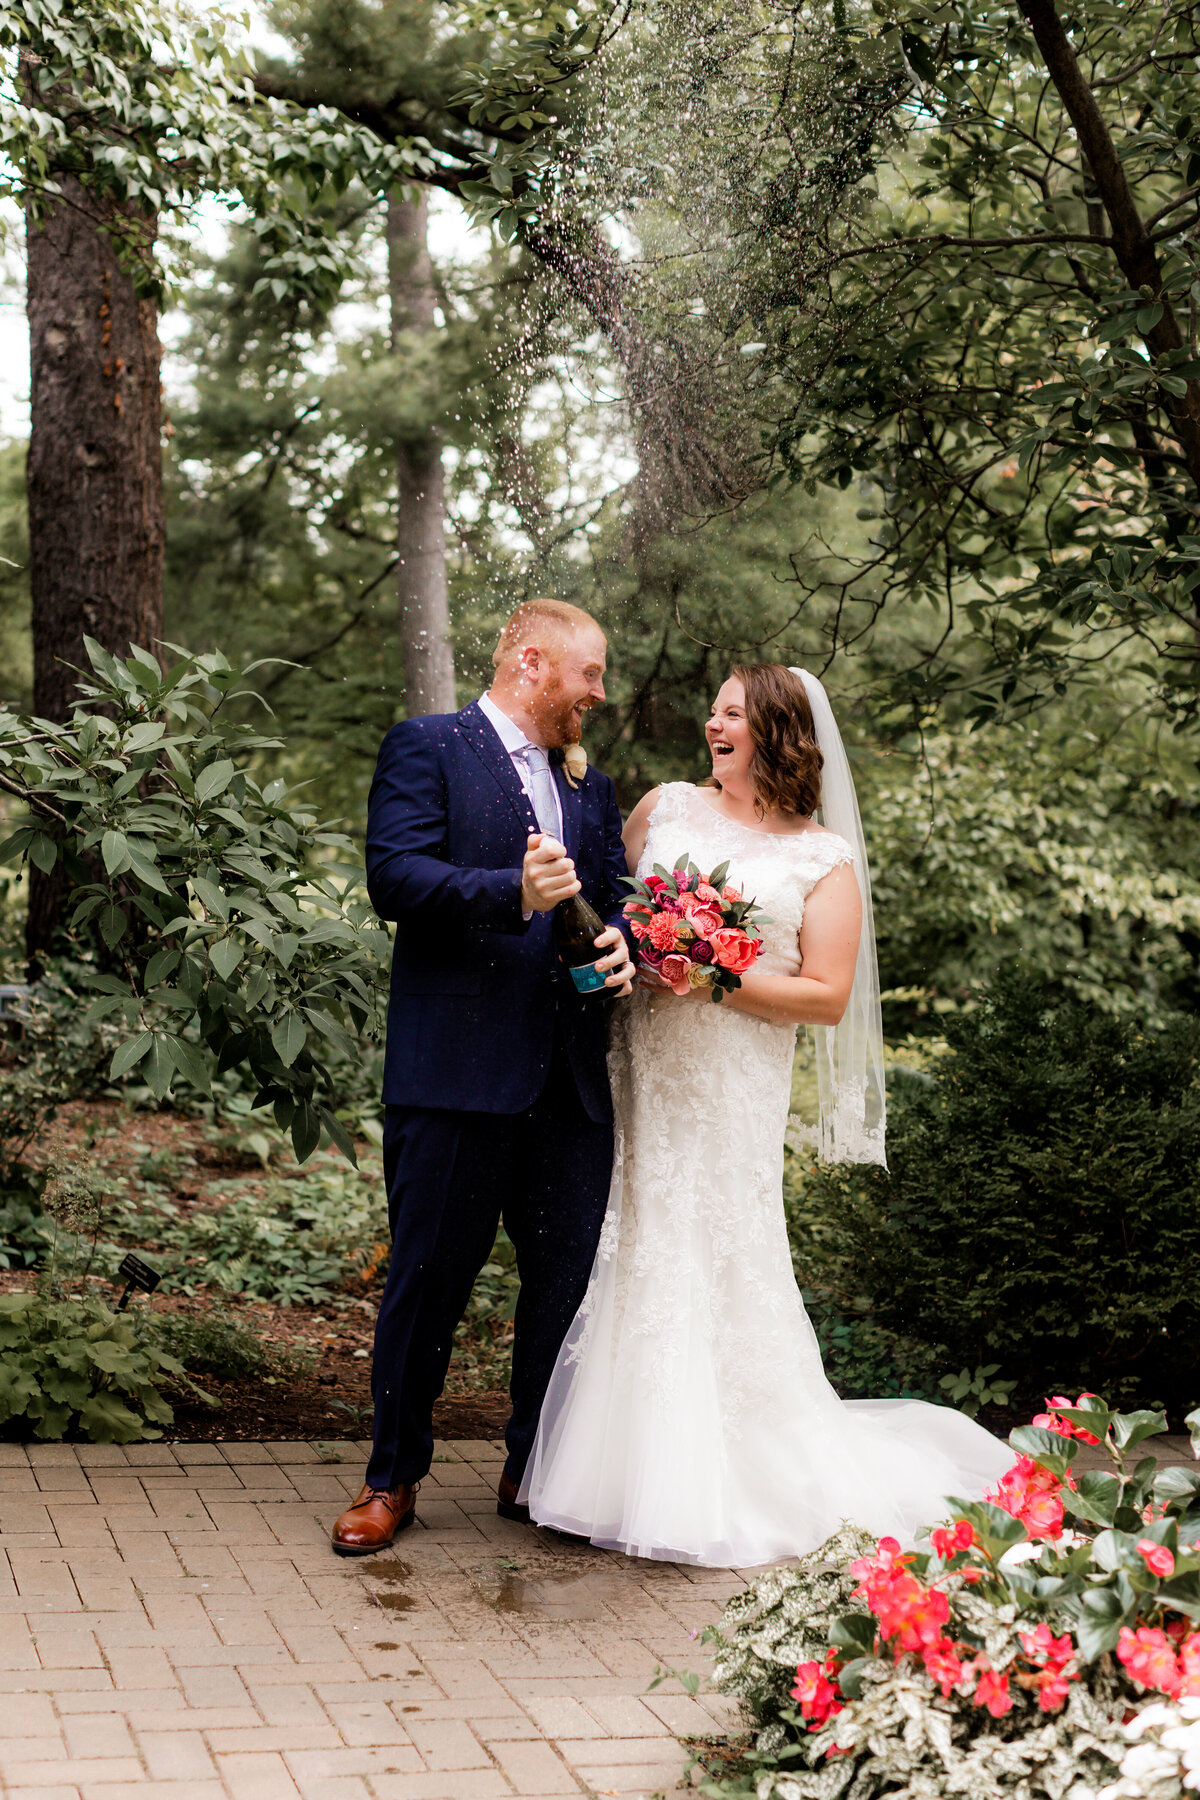 A couple share a champagne pop on their wedding day.